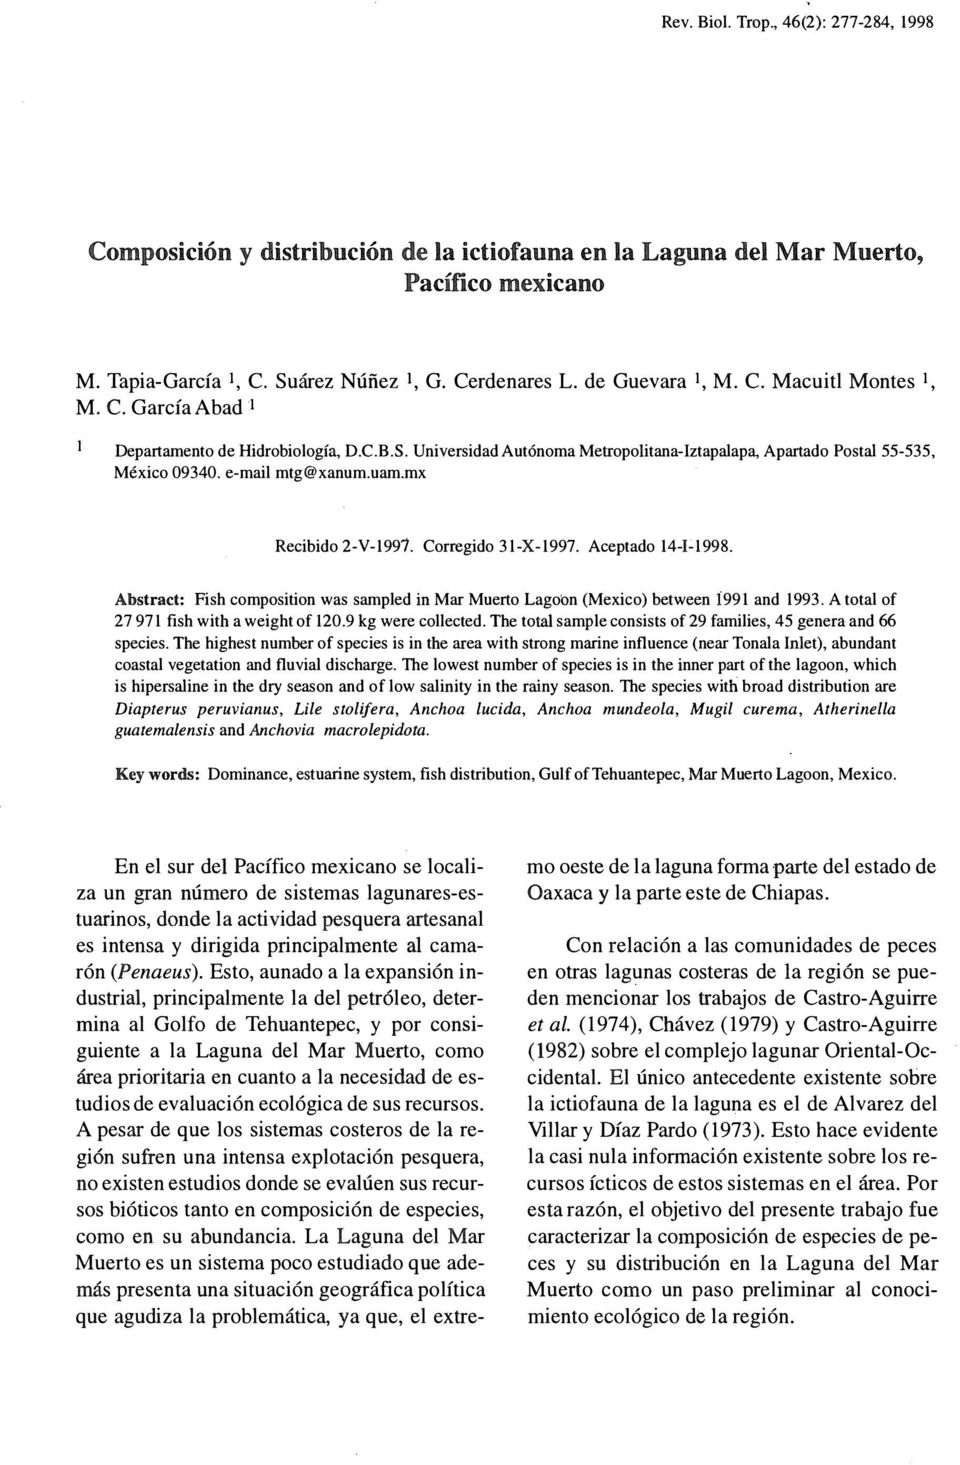 m Recibido 2-V-1991. Corregido 31--1997. Aceptado 14-1-1998. Abstract: Fish composition was sampled in Mar Muerto Lagoon (Meico) between 1991 and 1993. A total oc 27 971 fish with a weight oc 120.